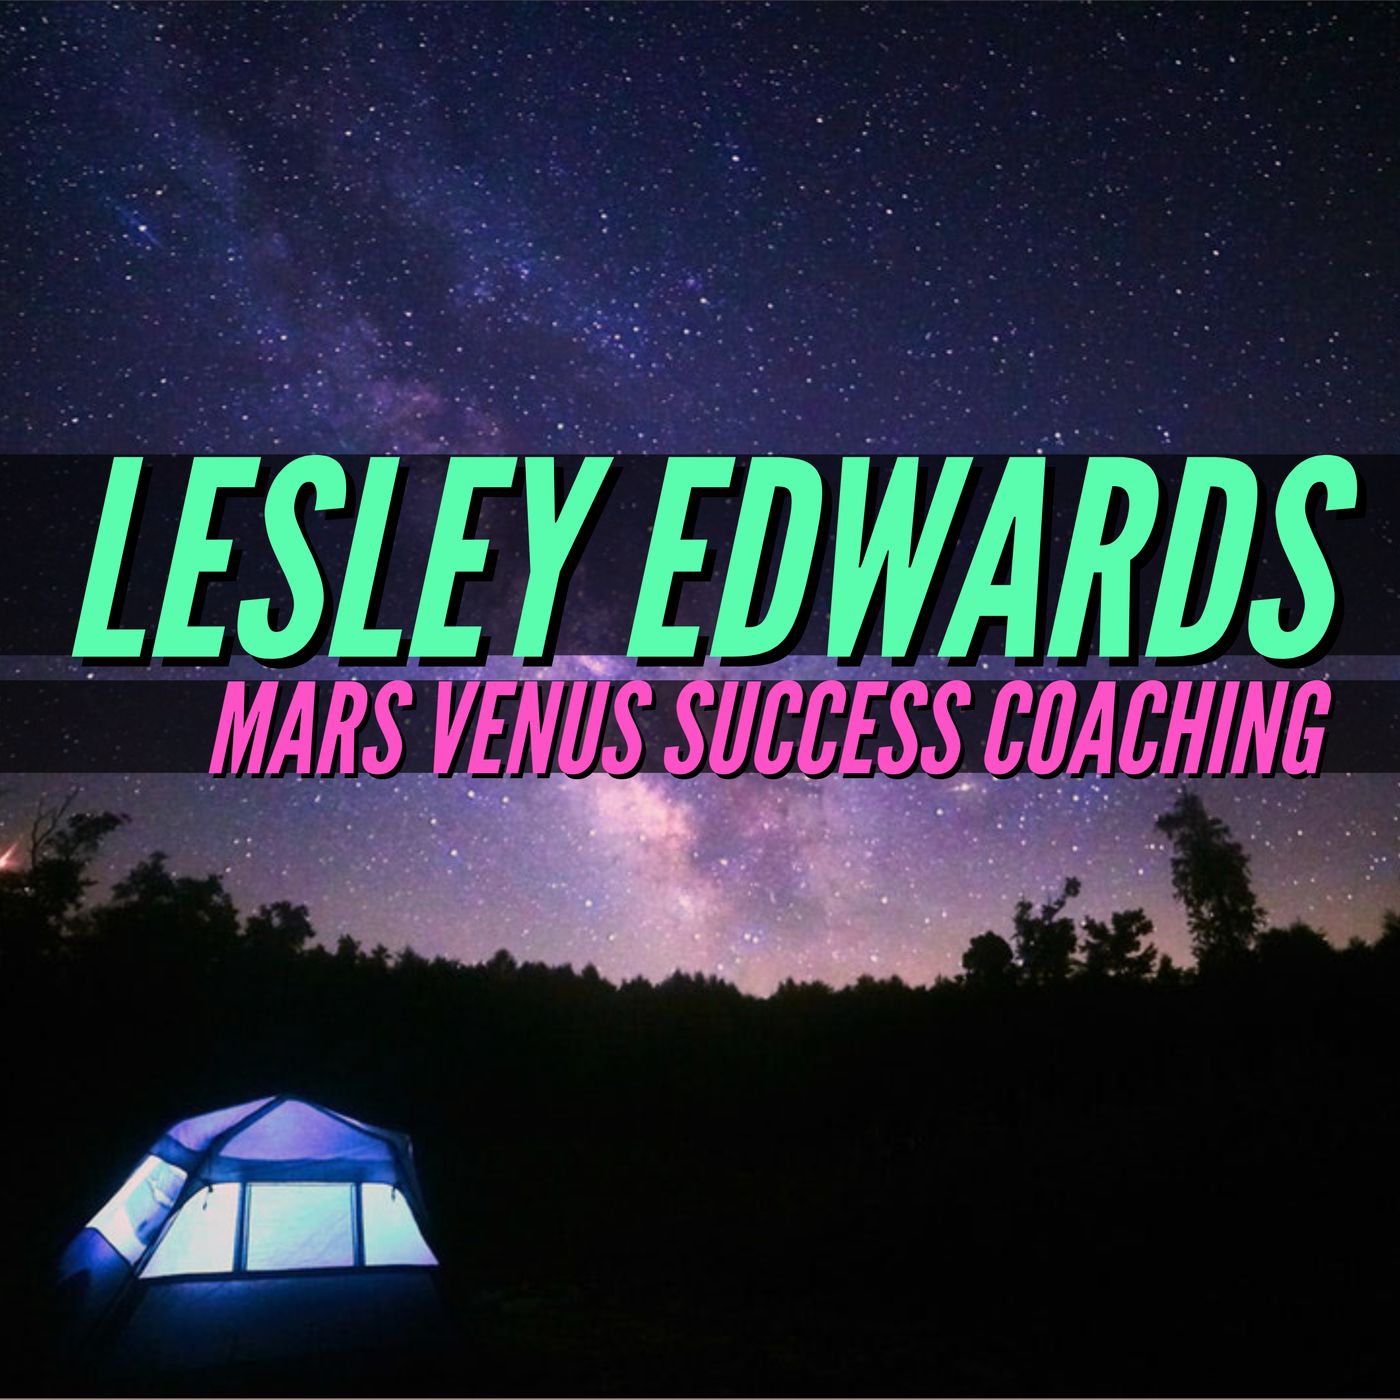 Dating Expert & Relationship Coach Lesley Edwards from Mars Venus Success Coaching